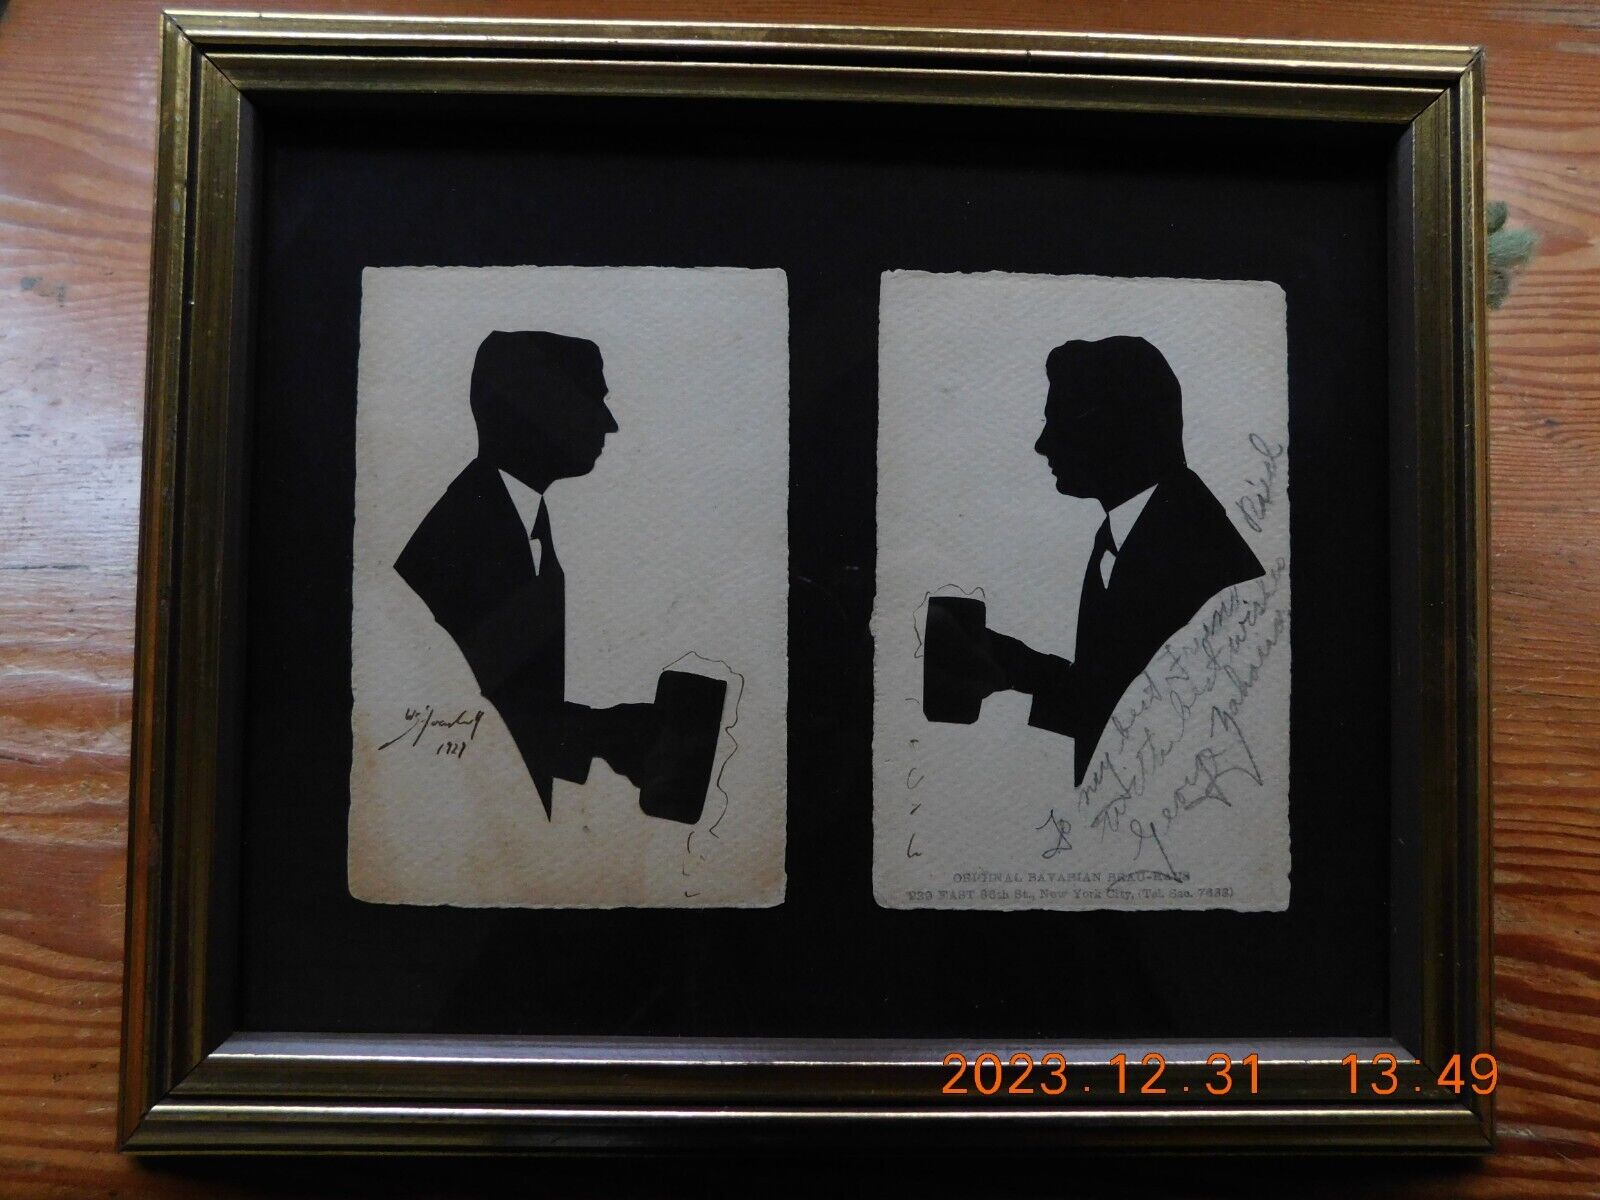 1927 signed silhouettes of  wrestler George Zaharias and friend at Brau-Haus NYC